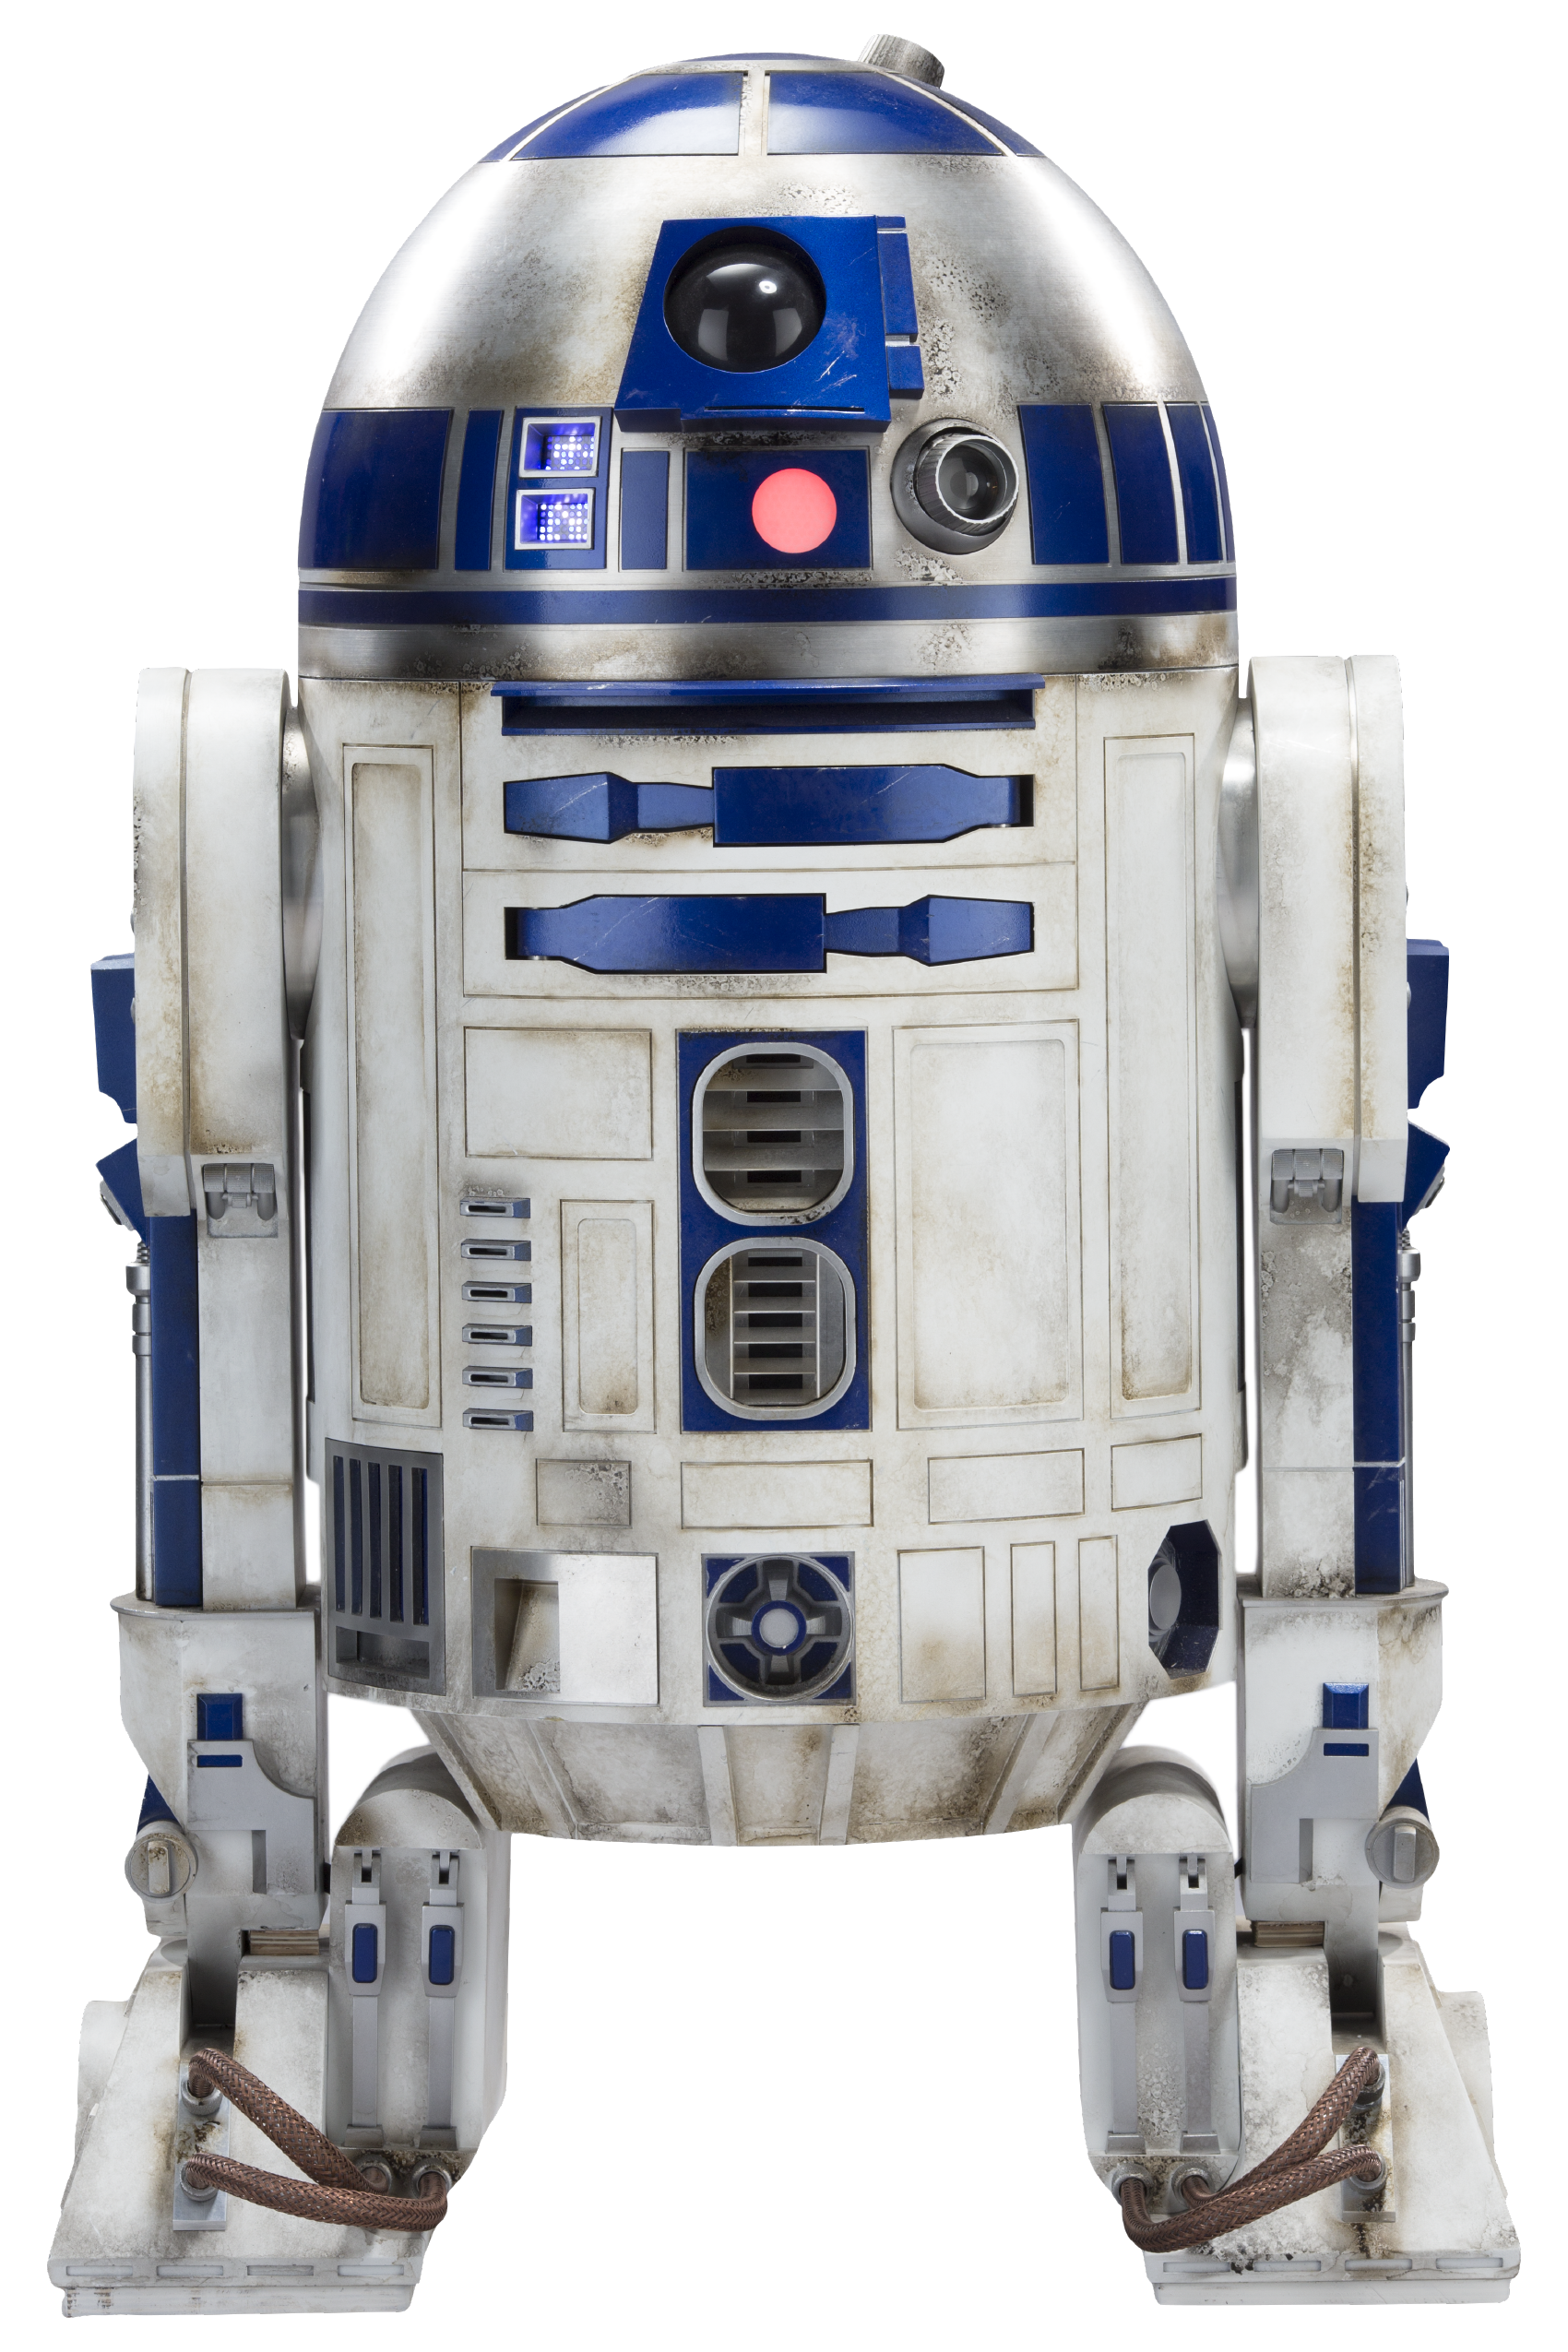 STAR WARS SMART R2-D2 INTELLIGENT RC DROID REMOTE CONTROLLED NEW SEALED 